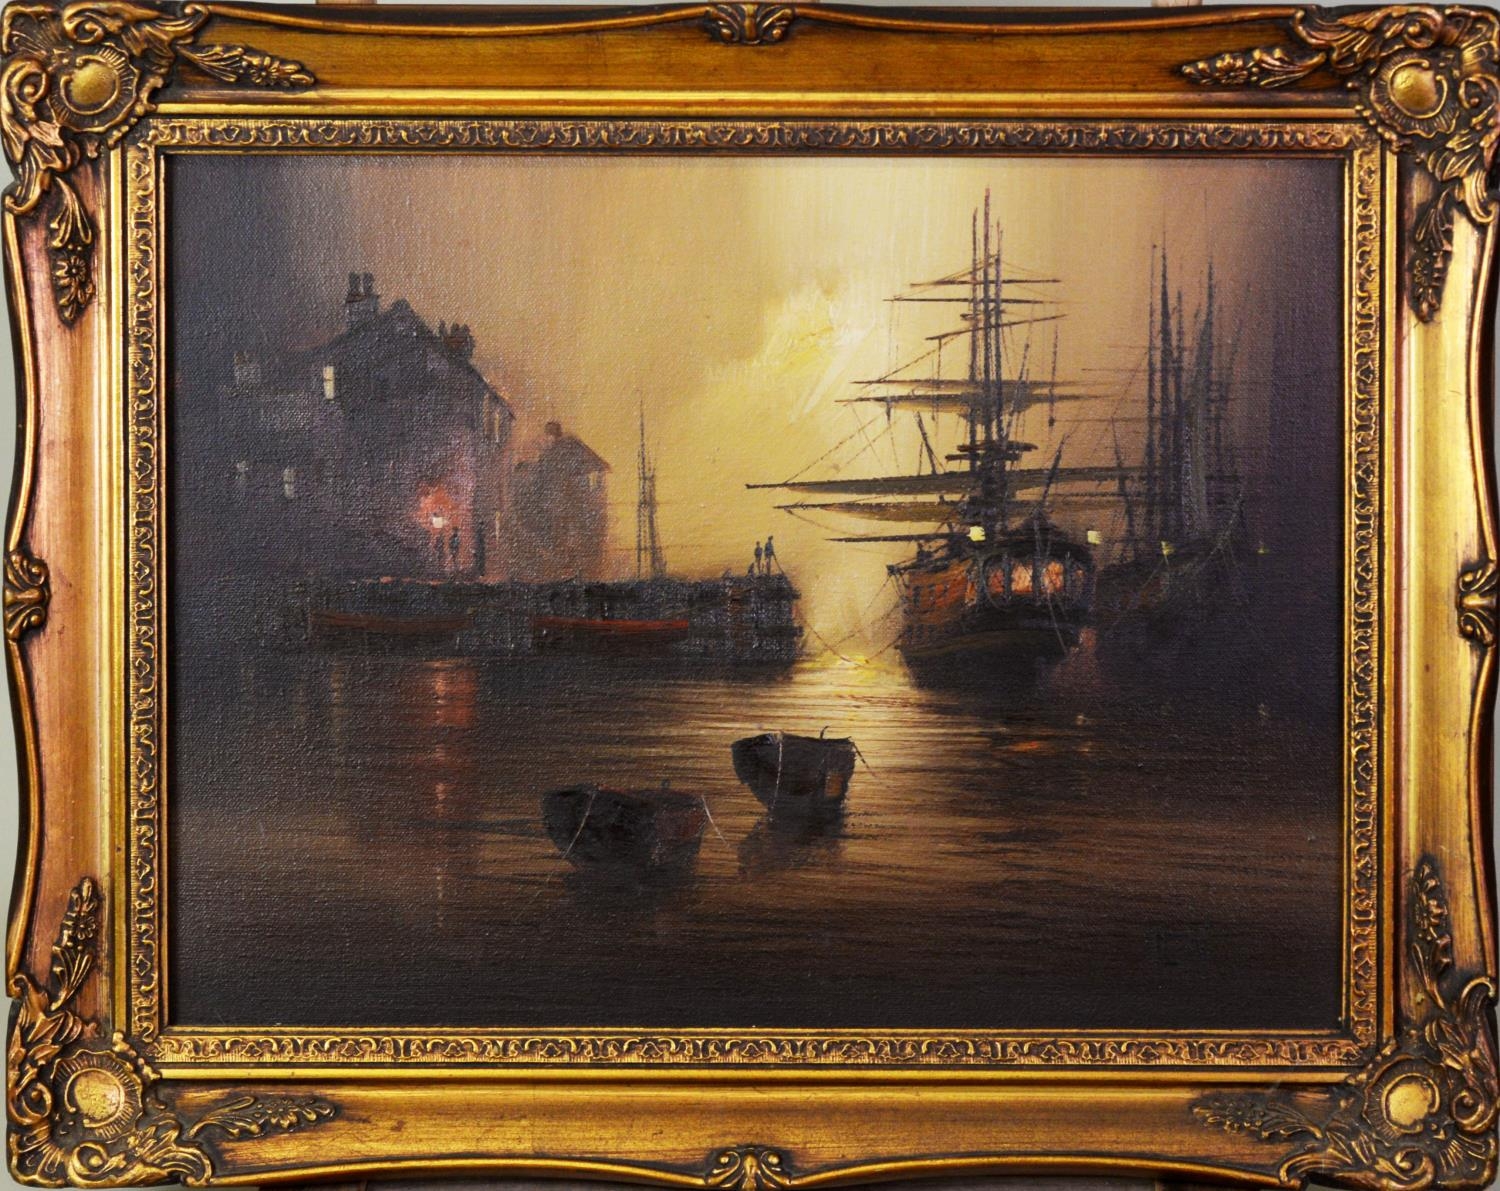 BARRY HILTON (b.1941) PAIR OF OILS ON CANVAS Moored galleons at sunset Signed 11 ¾” x 15 ½” (29. - Image 2 of 4